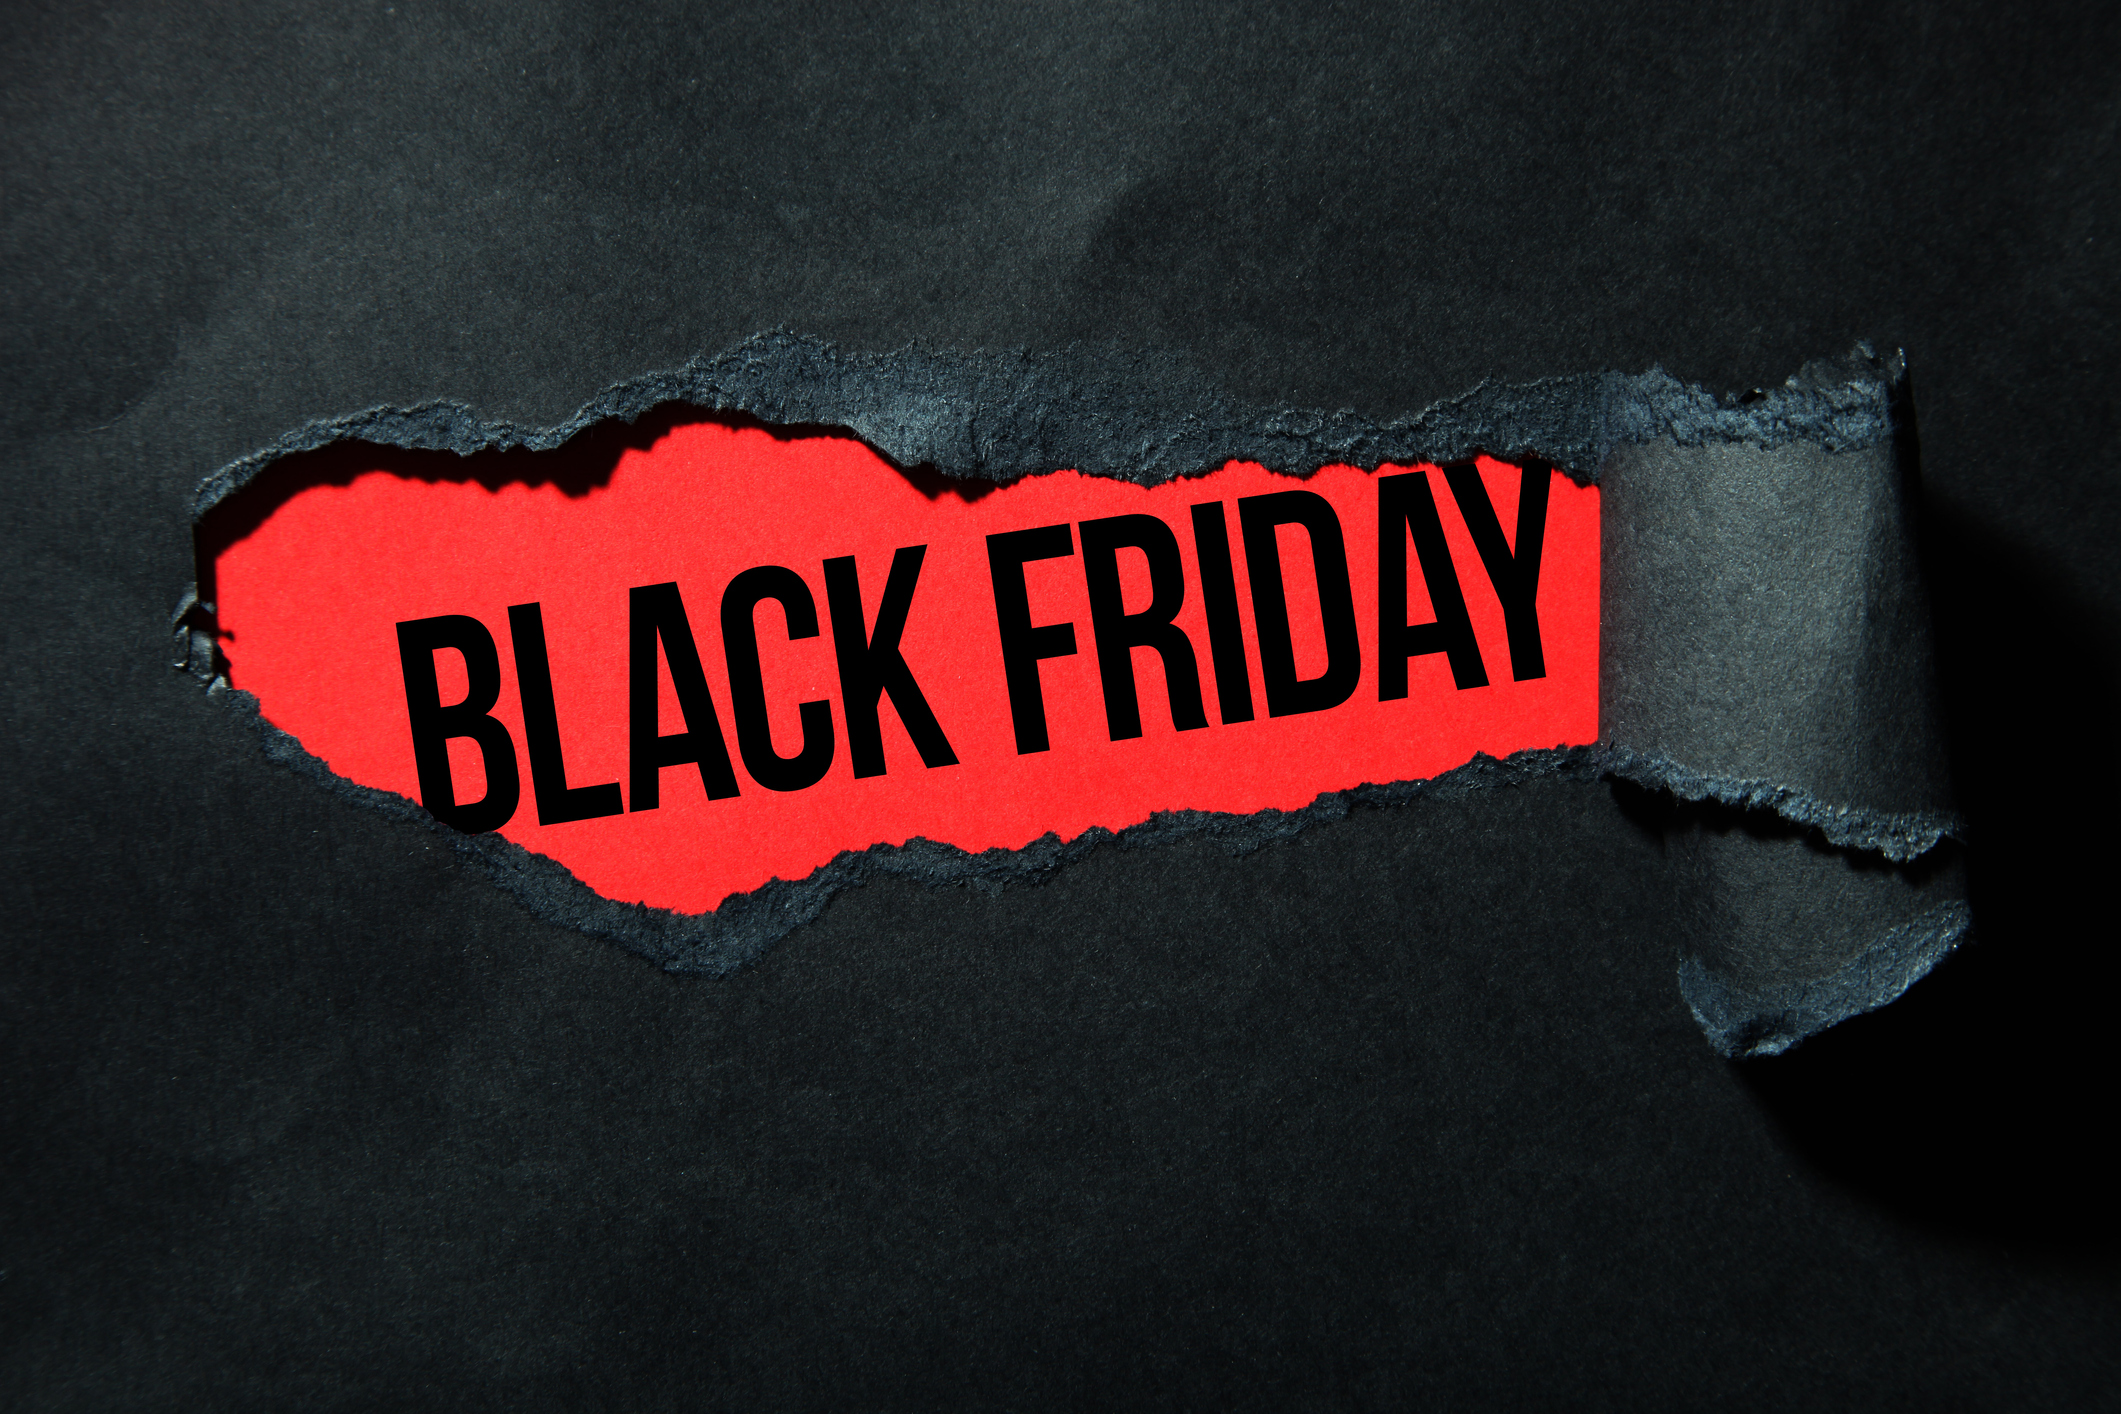 Black torn paper and the inscription "black friday" on a red background.